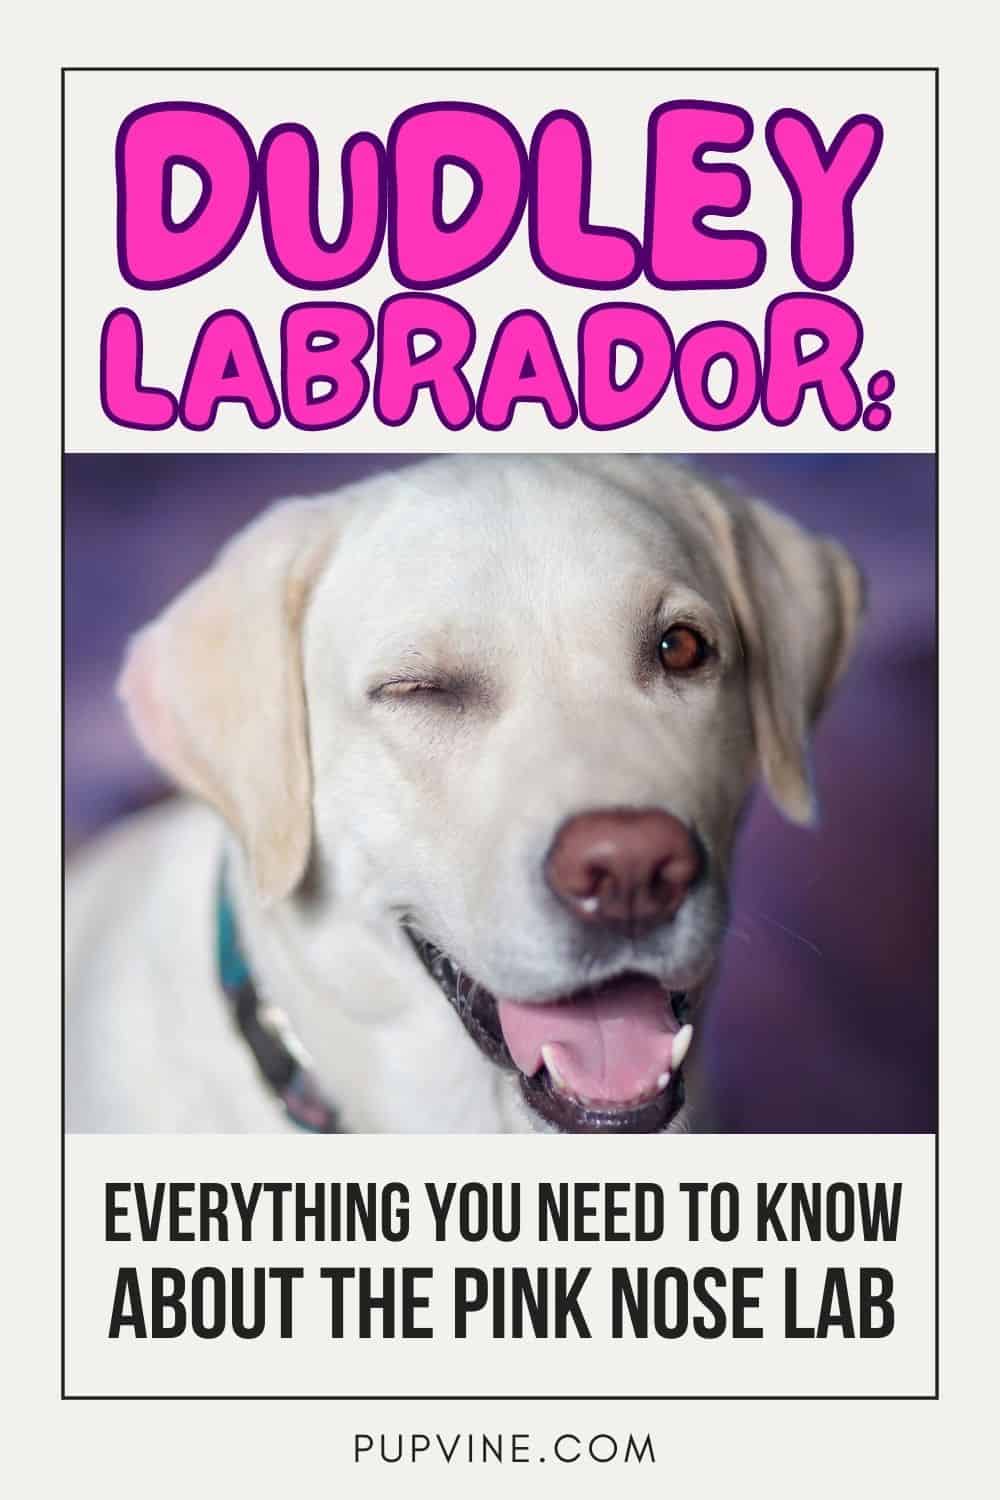 Dudley Labrador: Everything You Need To Know About The Pink Nose Lab